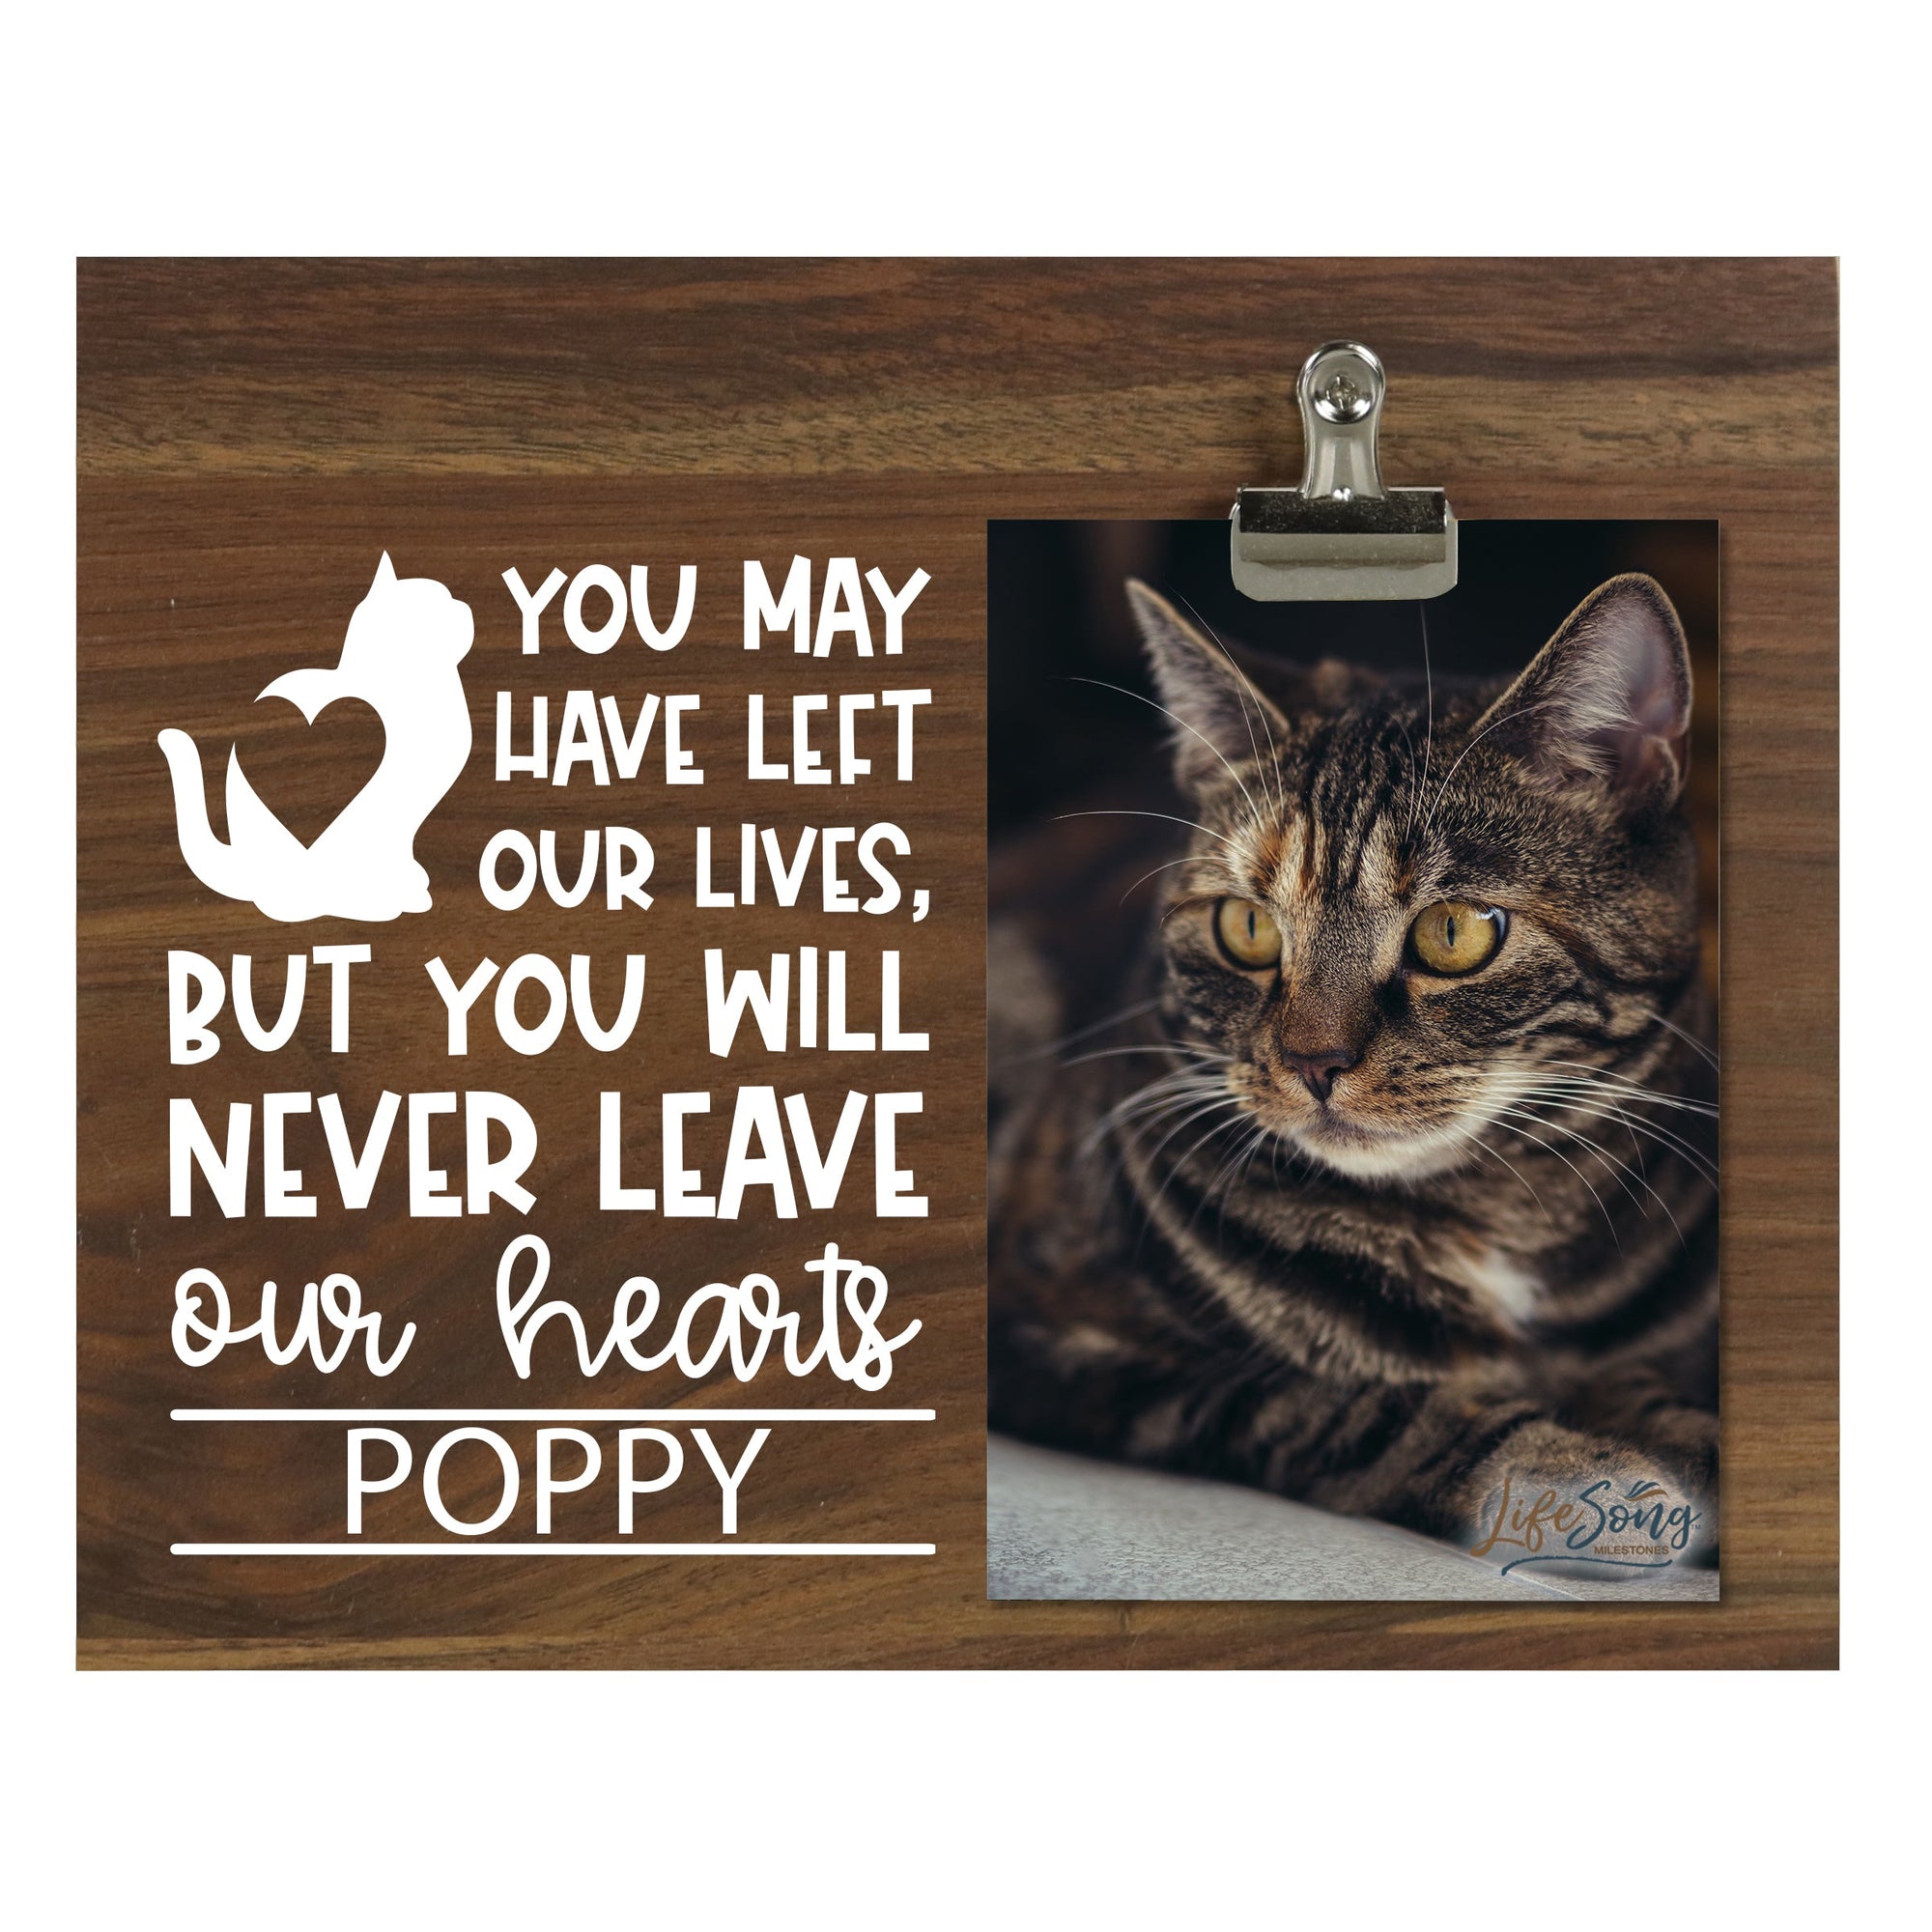 Pet Memorial Photo Clip Board - You May Have Left Our Lives (Cat)